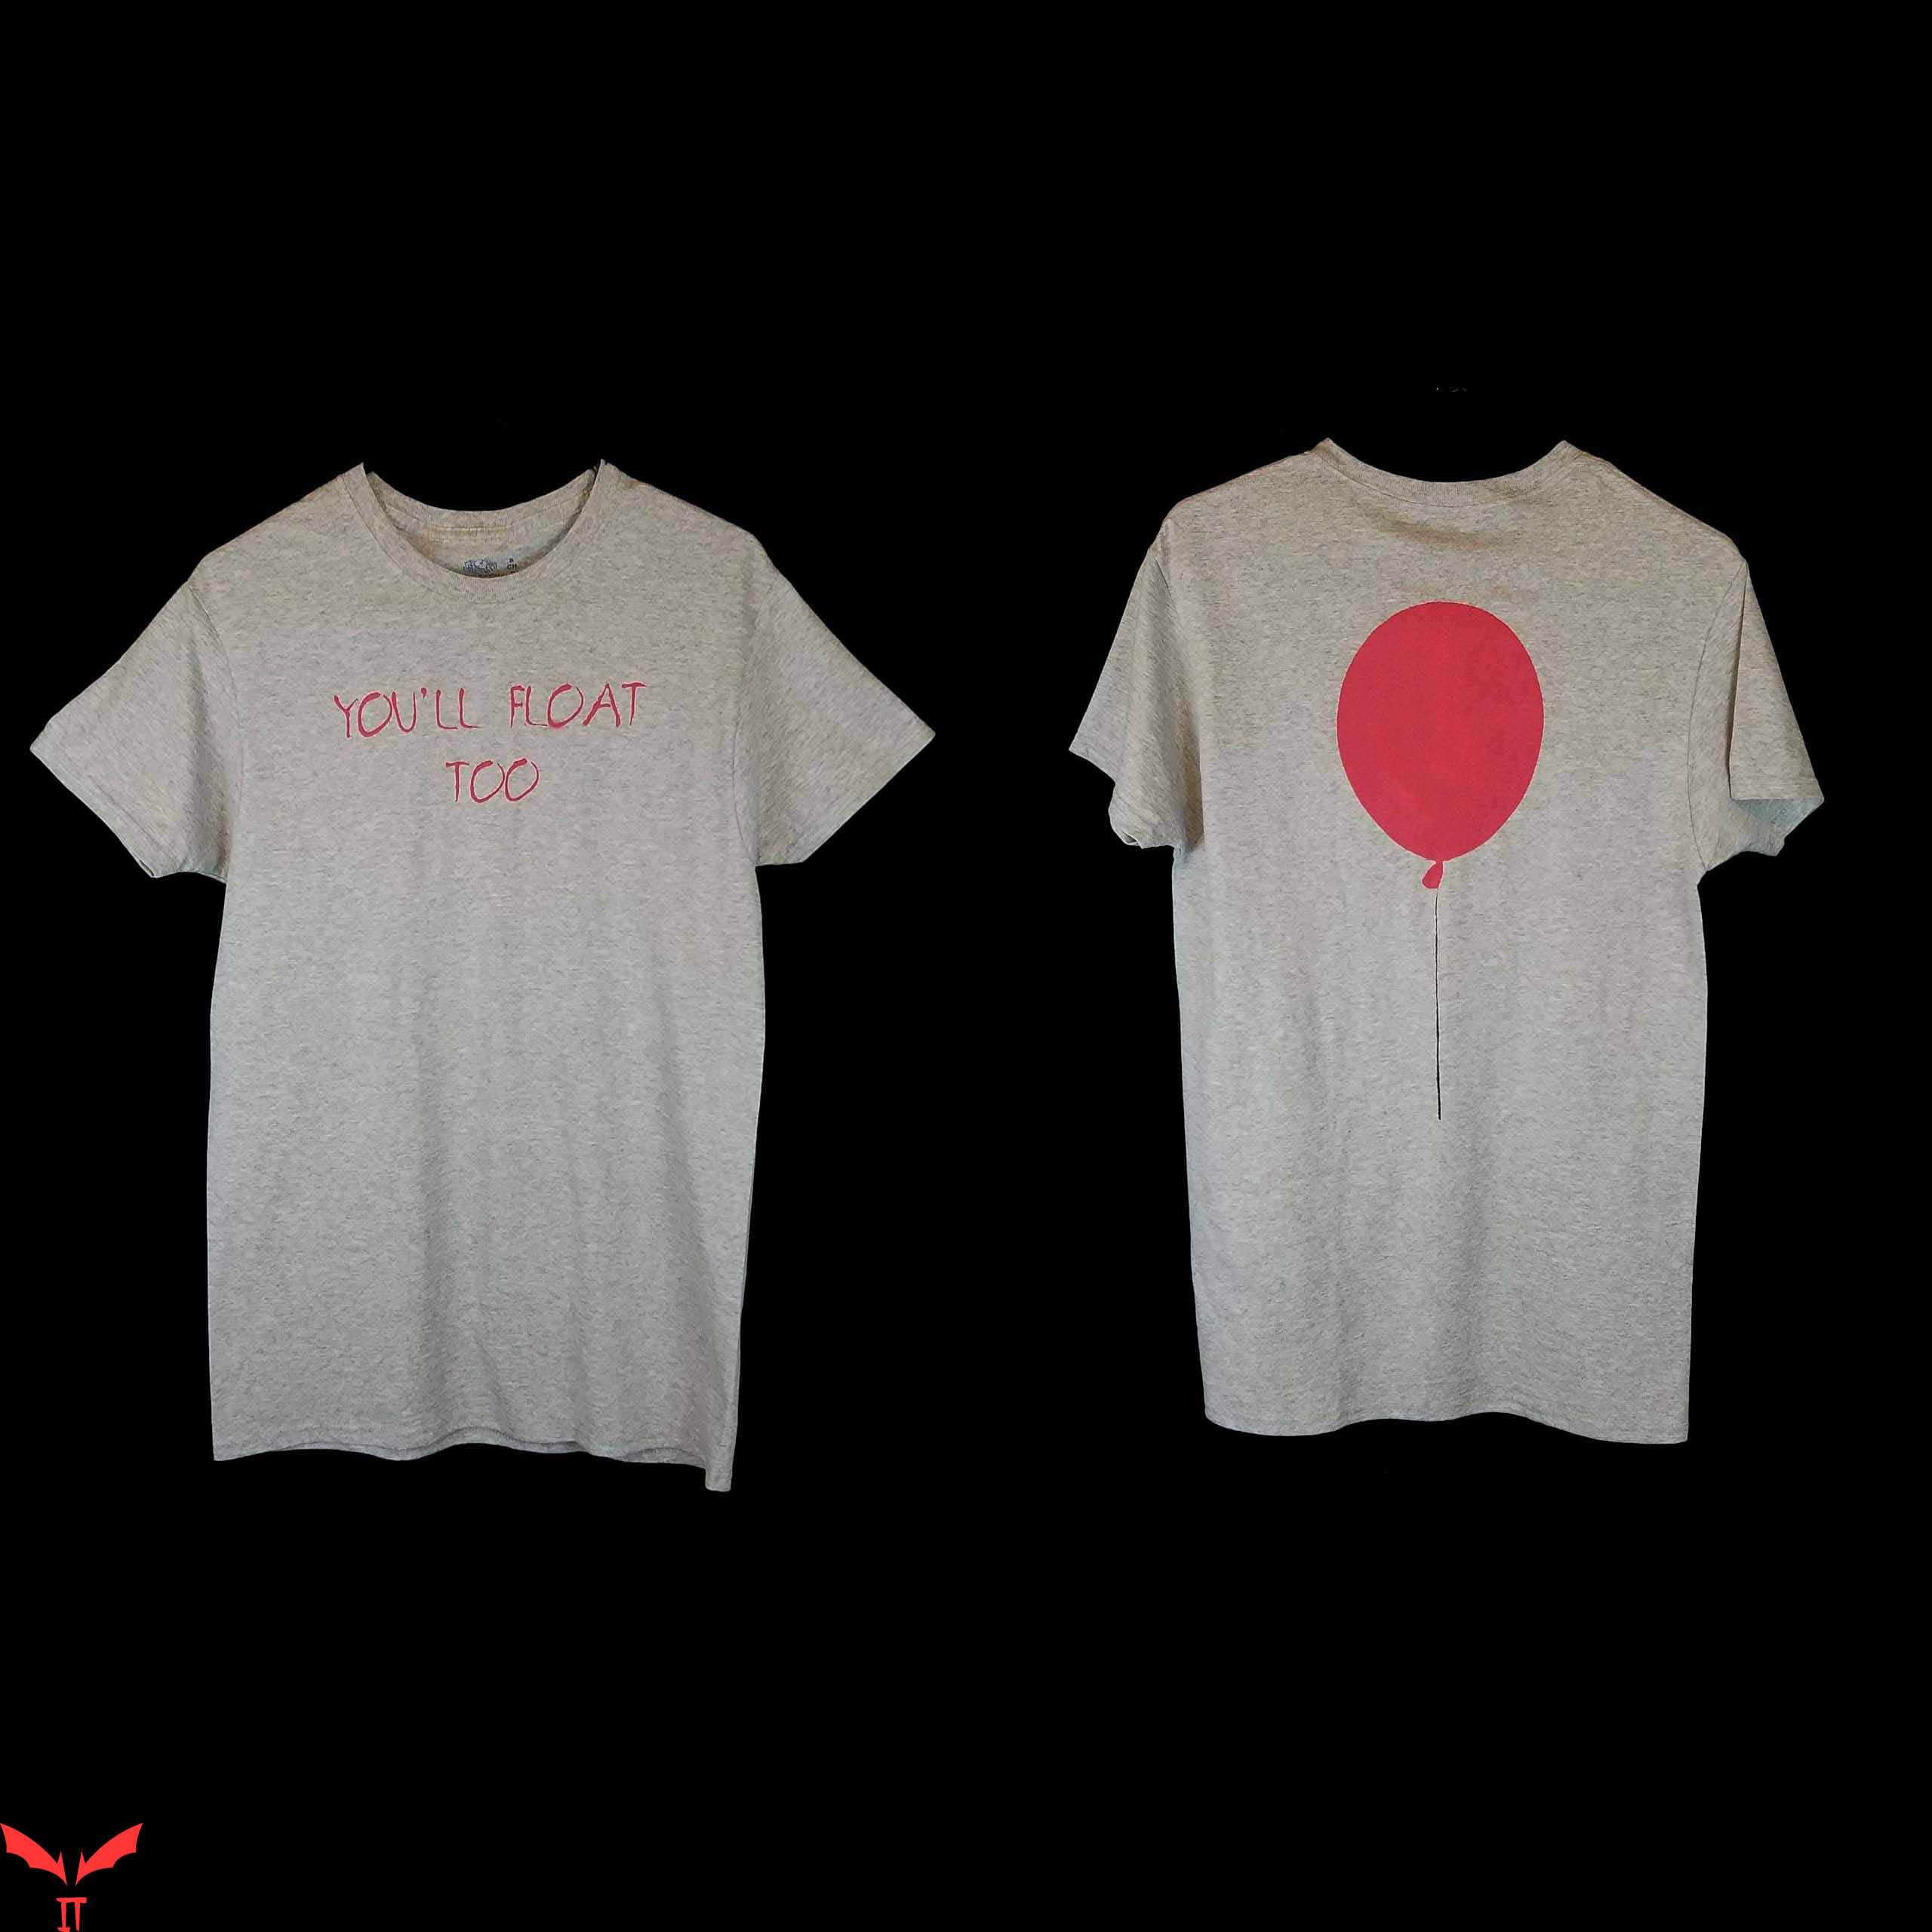 You'll Float Too T-Shirt Red Balloon IT Horror Movie Inspired